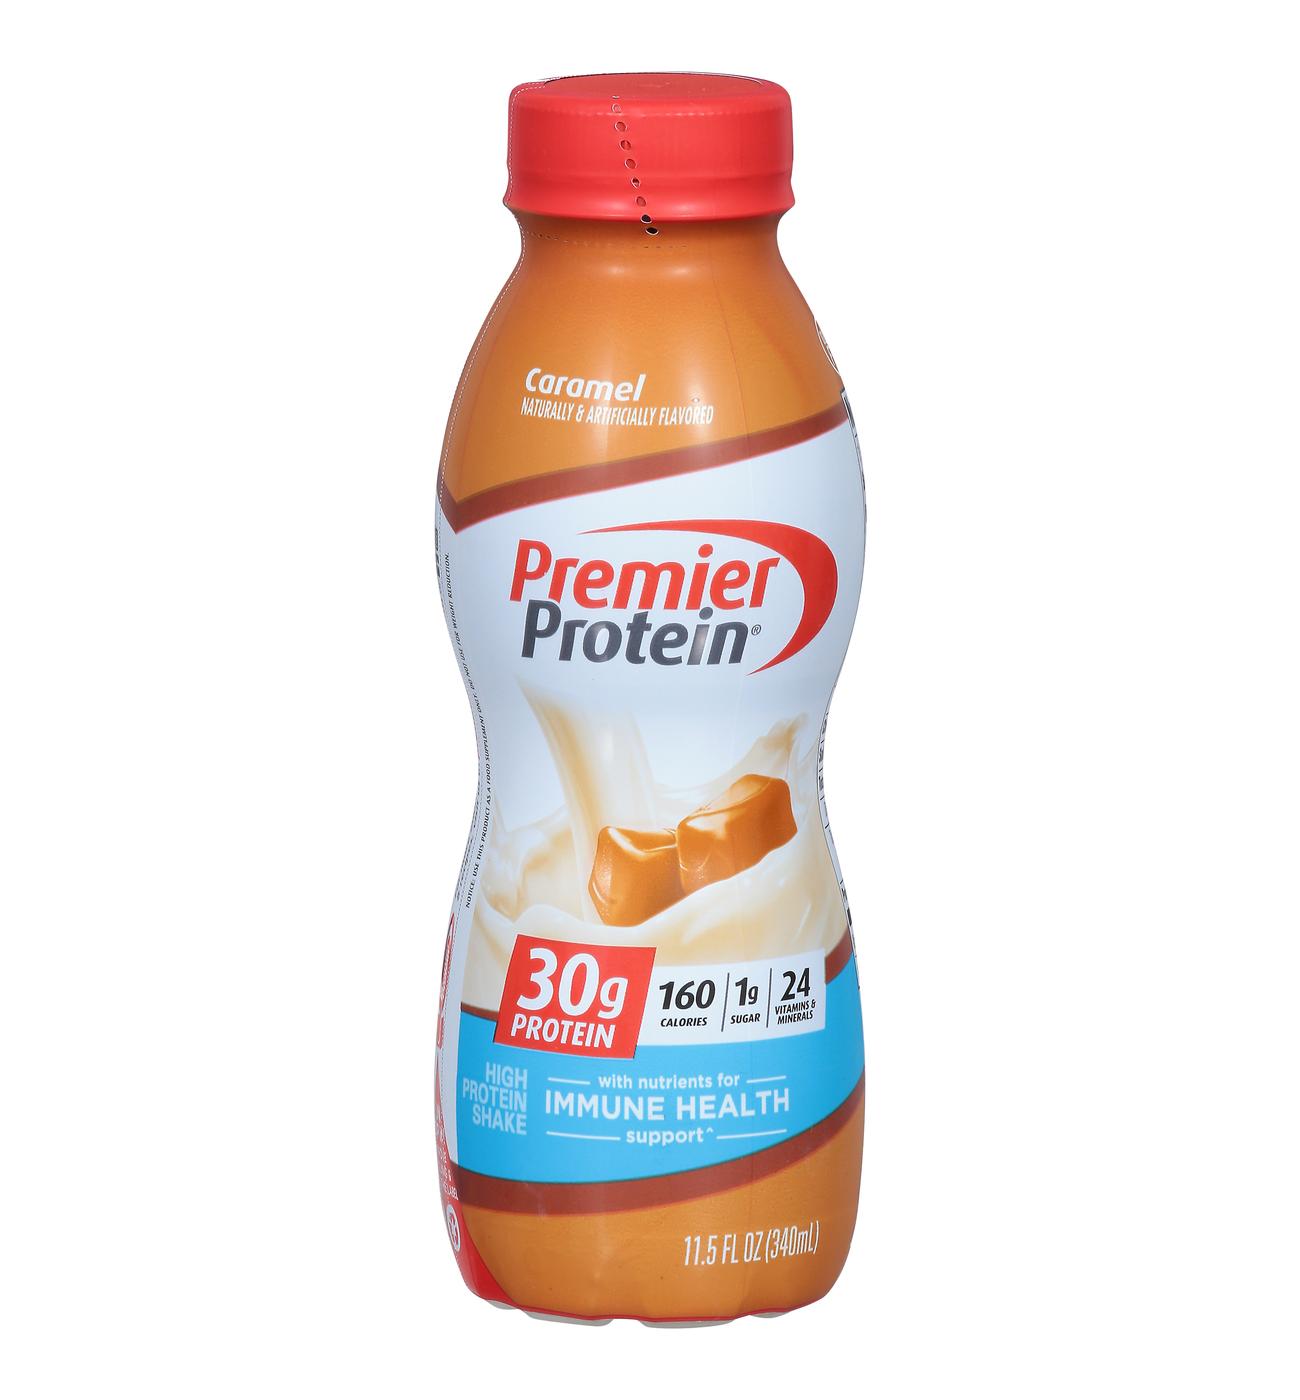 Premier Protein High Protein Shake, 30g - Caramel; image 1 of 2